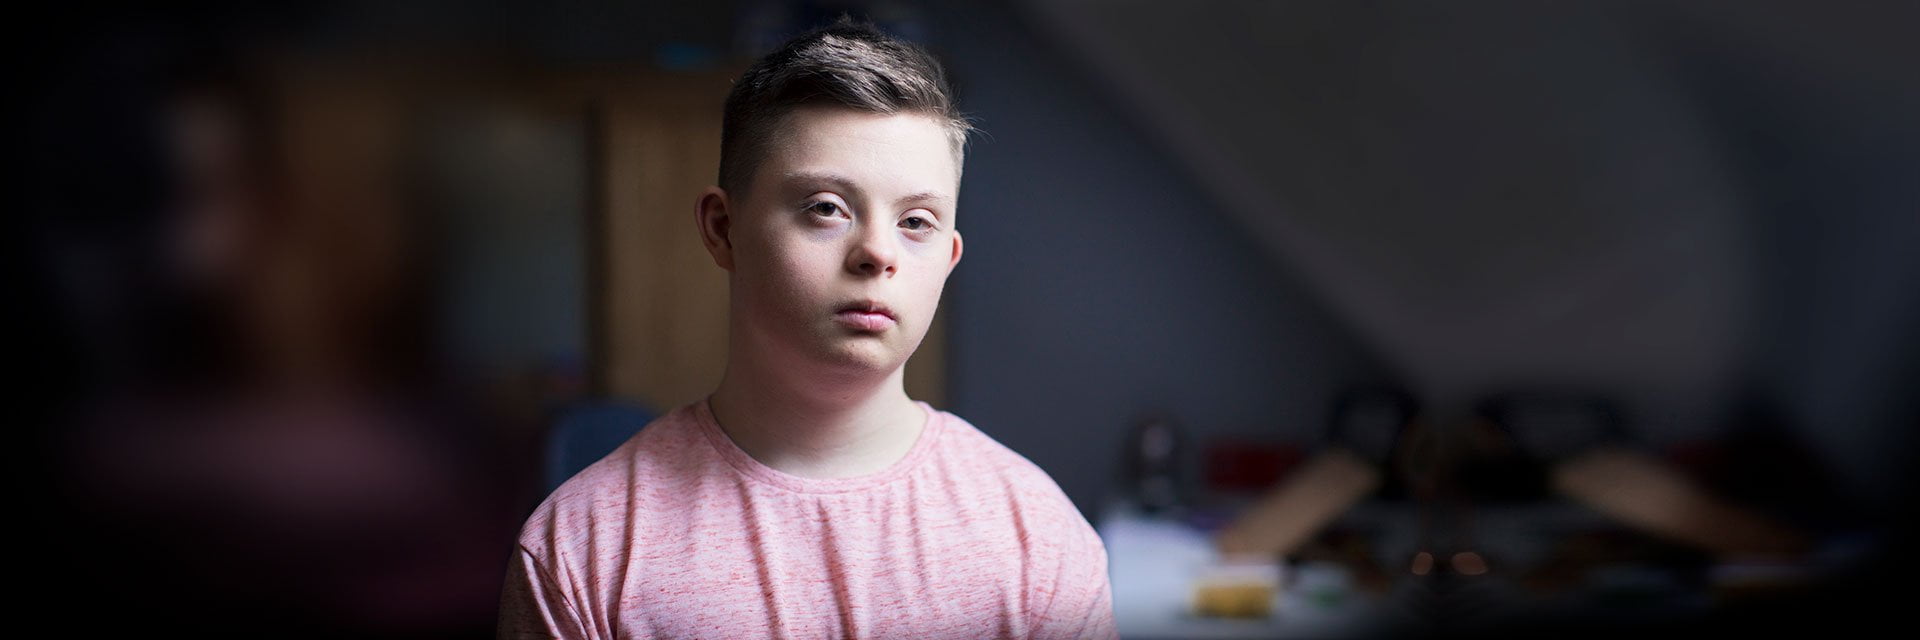 Young man with down syndrome looking at the camera and not smiling